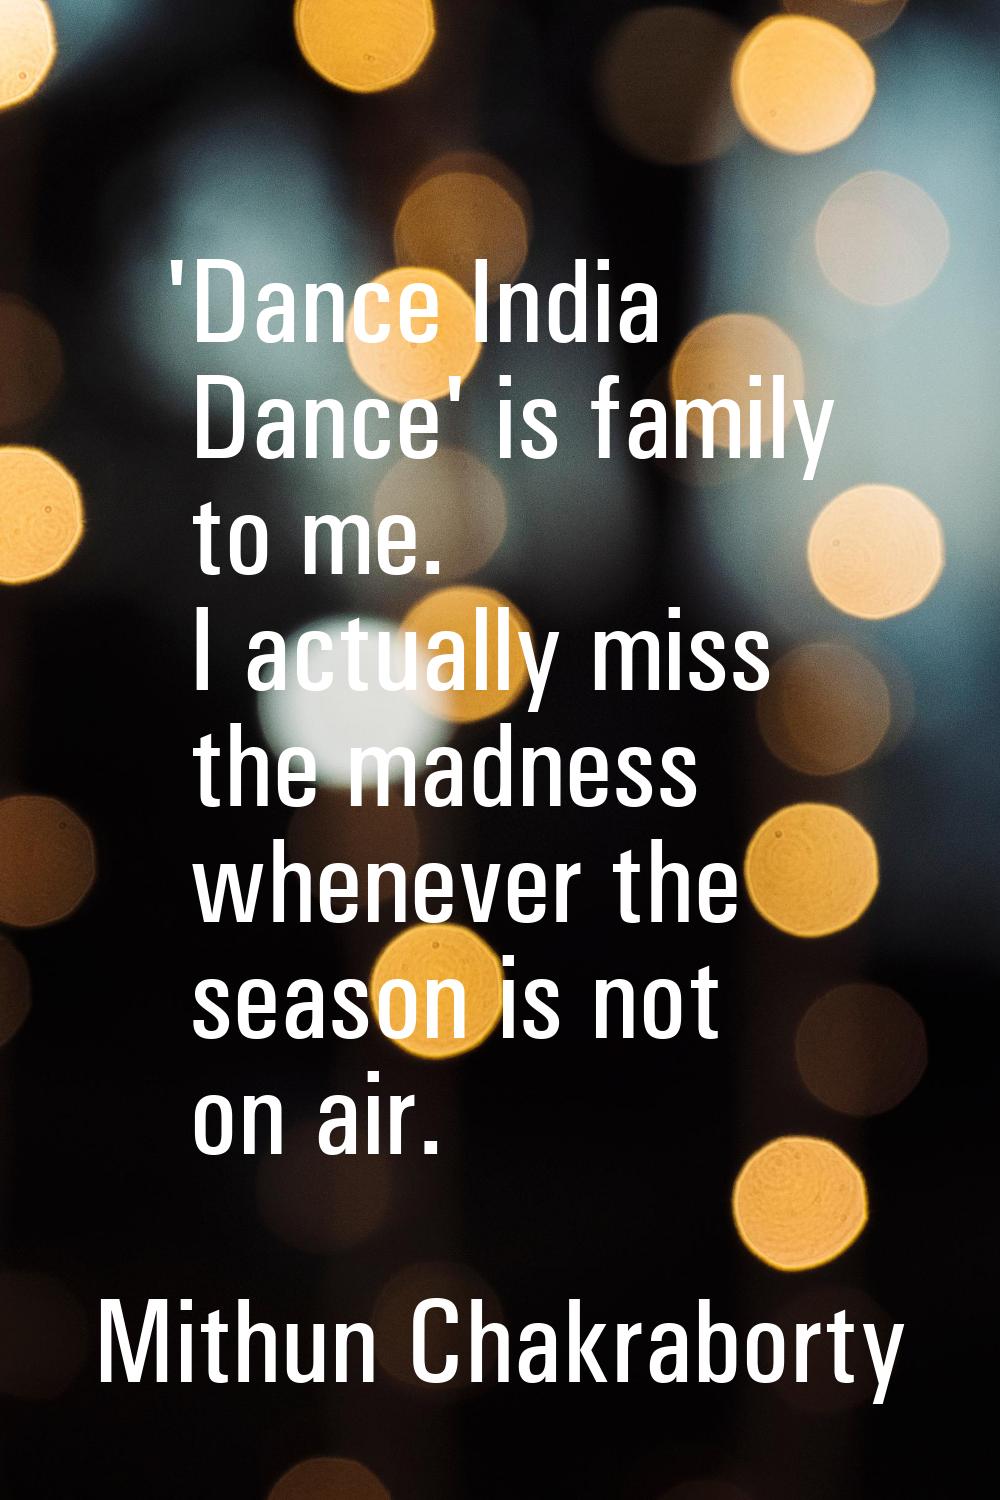 'Dance India Dance' is family to me. I actually miss the madness whenever the season is not on air.